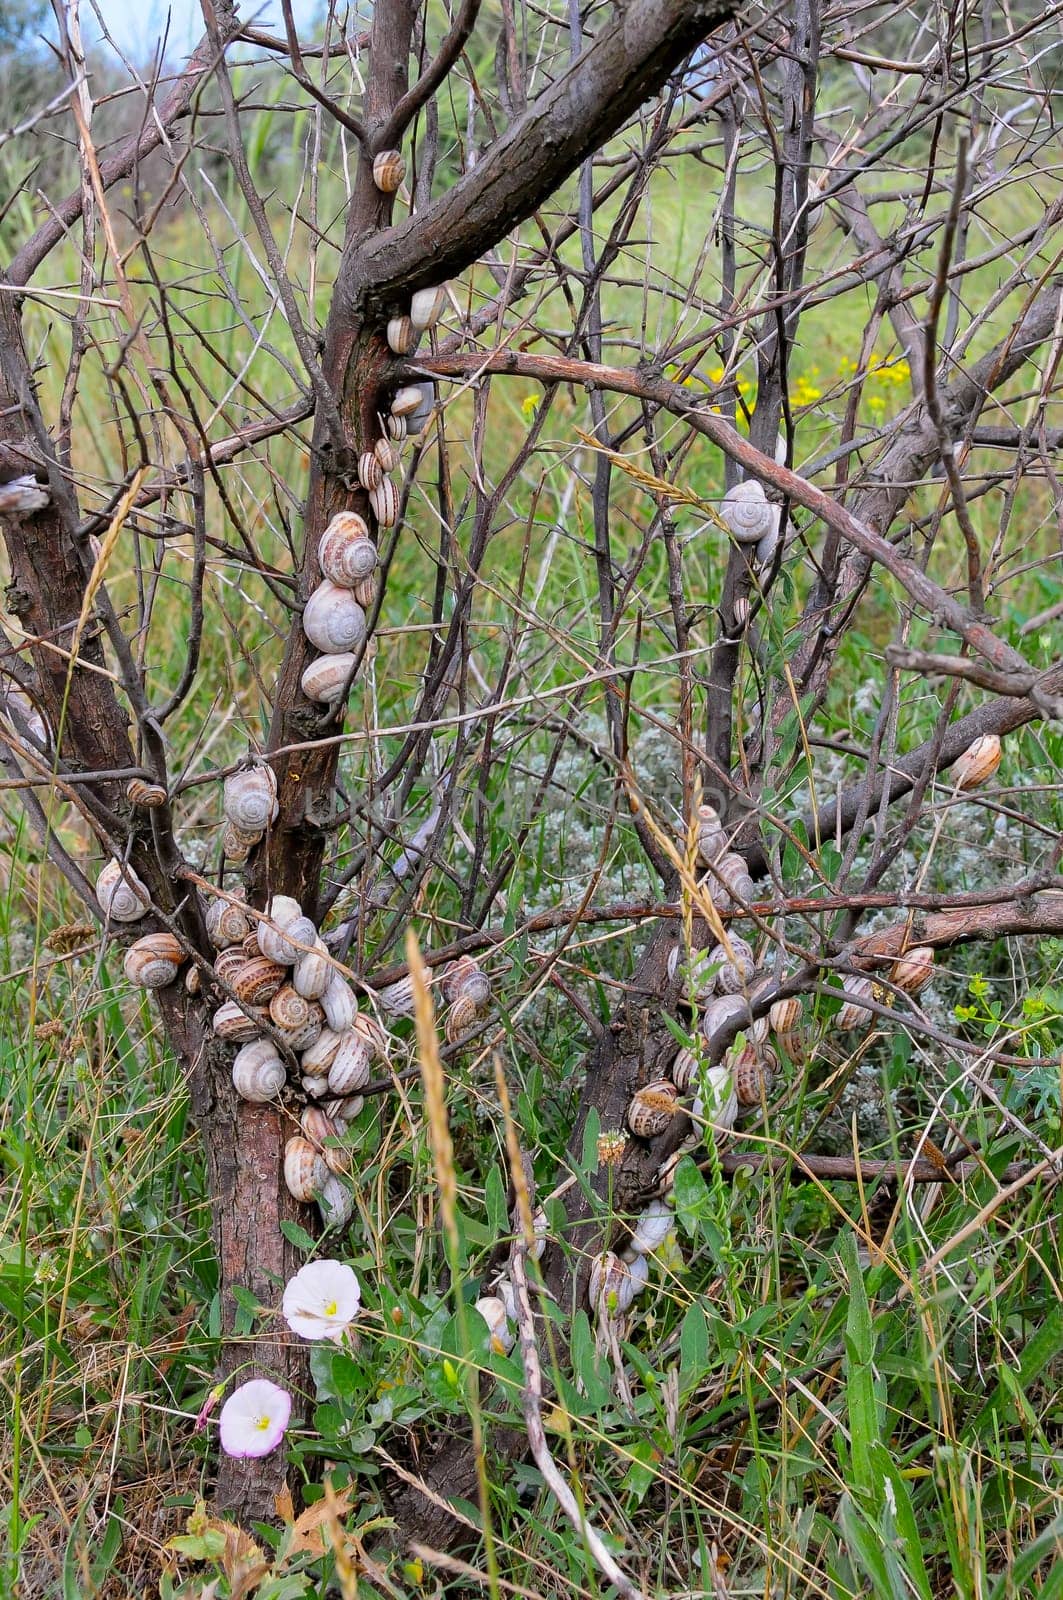 Eobania vermiculata (Helicidae),  accumulation of sleeping mollusks on the branches of plants in summer in the eastern Crimea by Hydrobiolog